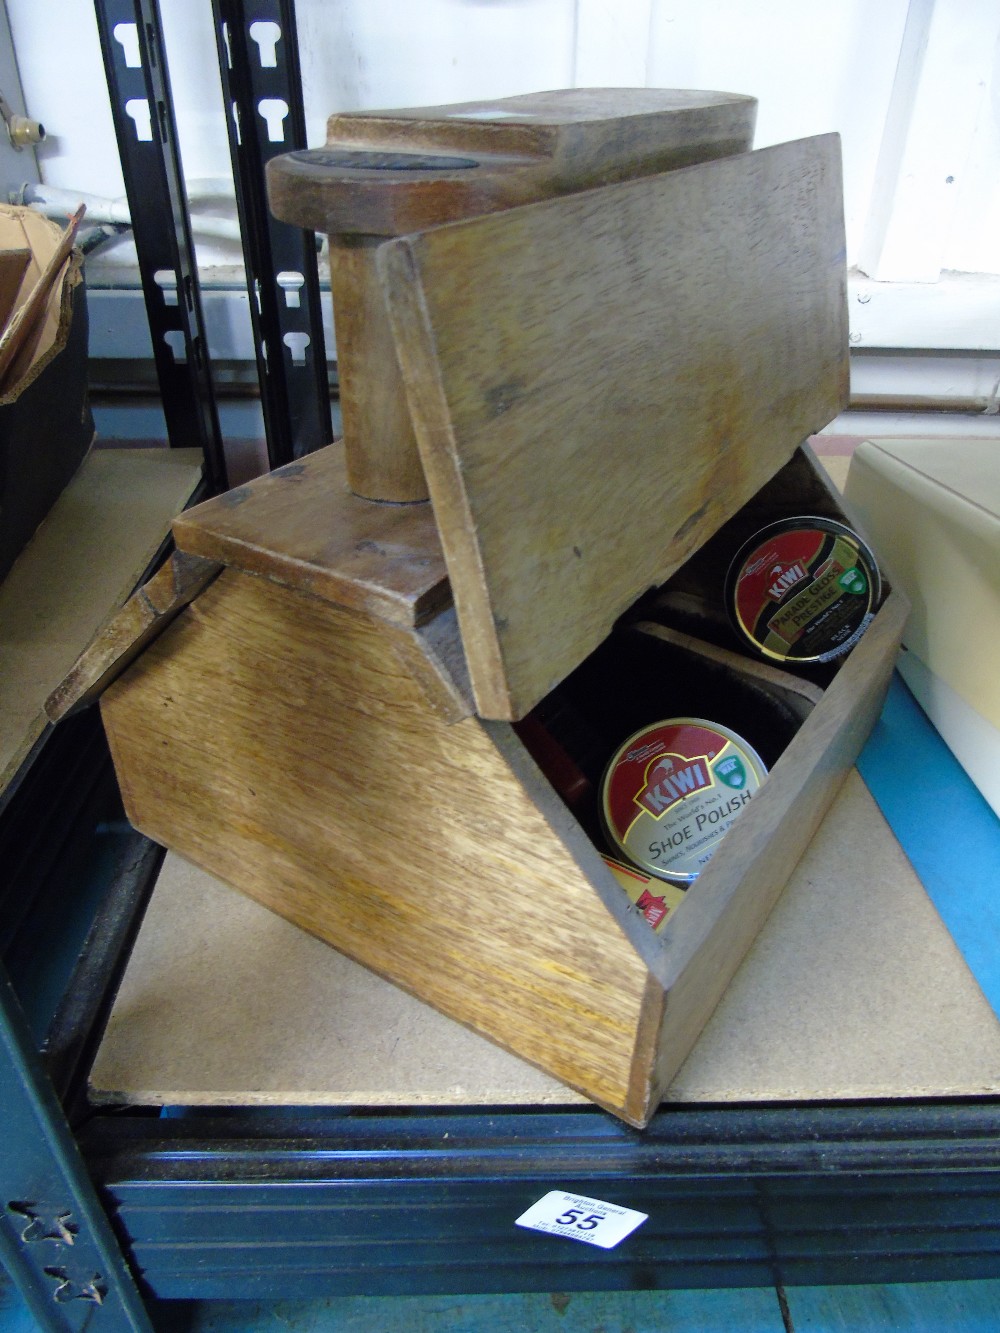 LOVELY VINTAGE 'SHOE SHINE' BOX/STAND INC CONTENTS